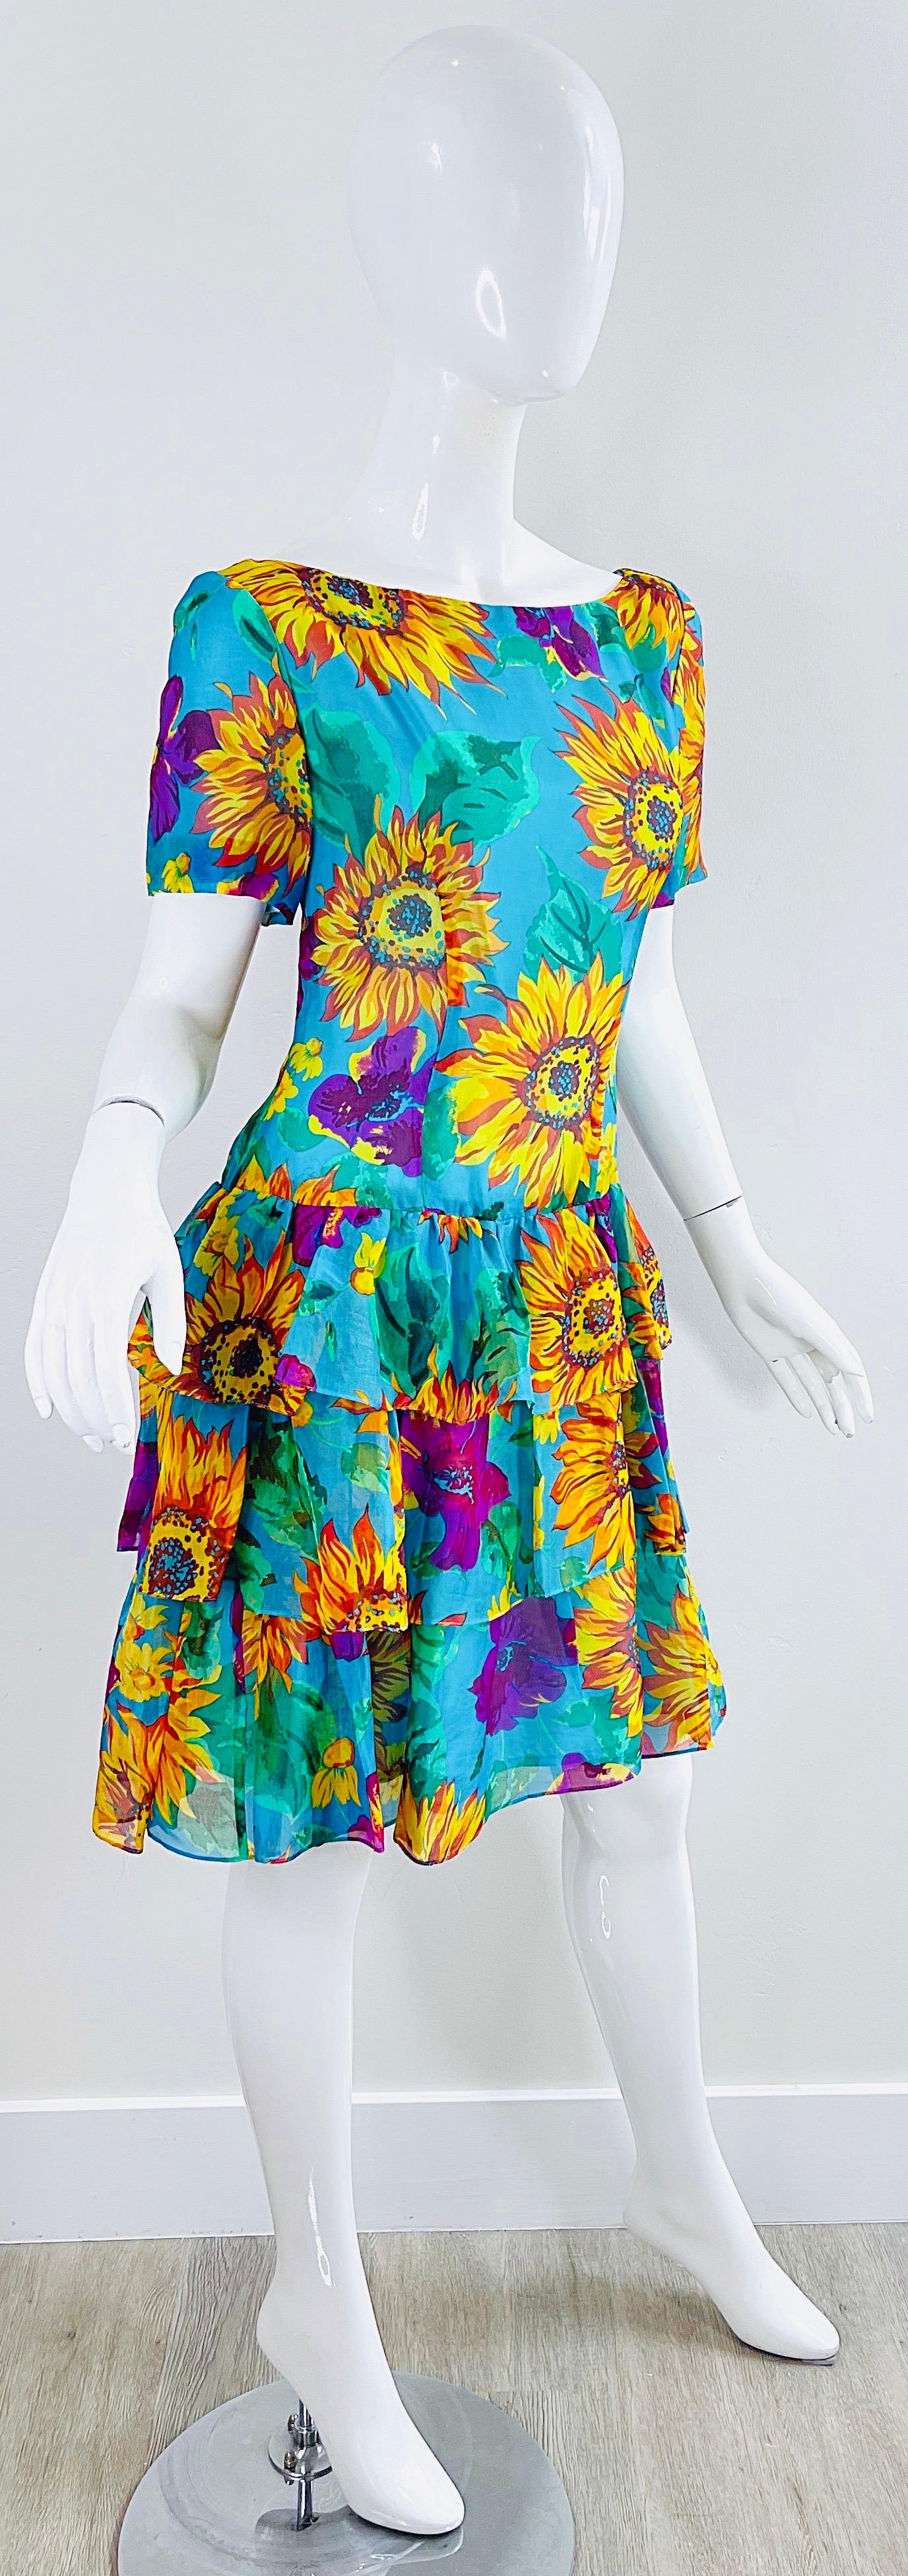 Chic 1980s Silk Chiffon Size 8 / 10 Sunflower Print Turquoise Vintage 80s Dress For Sale 1